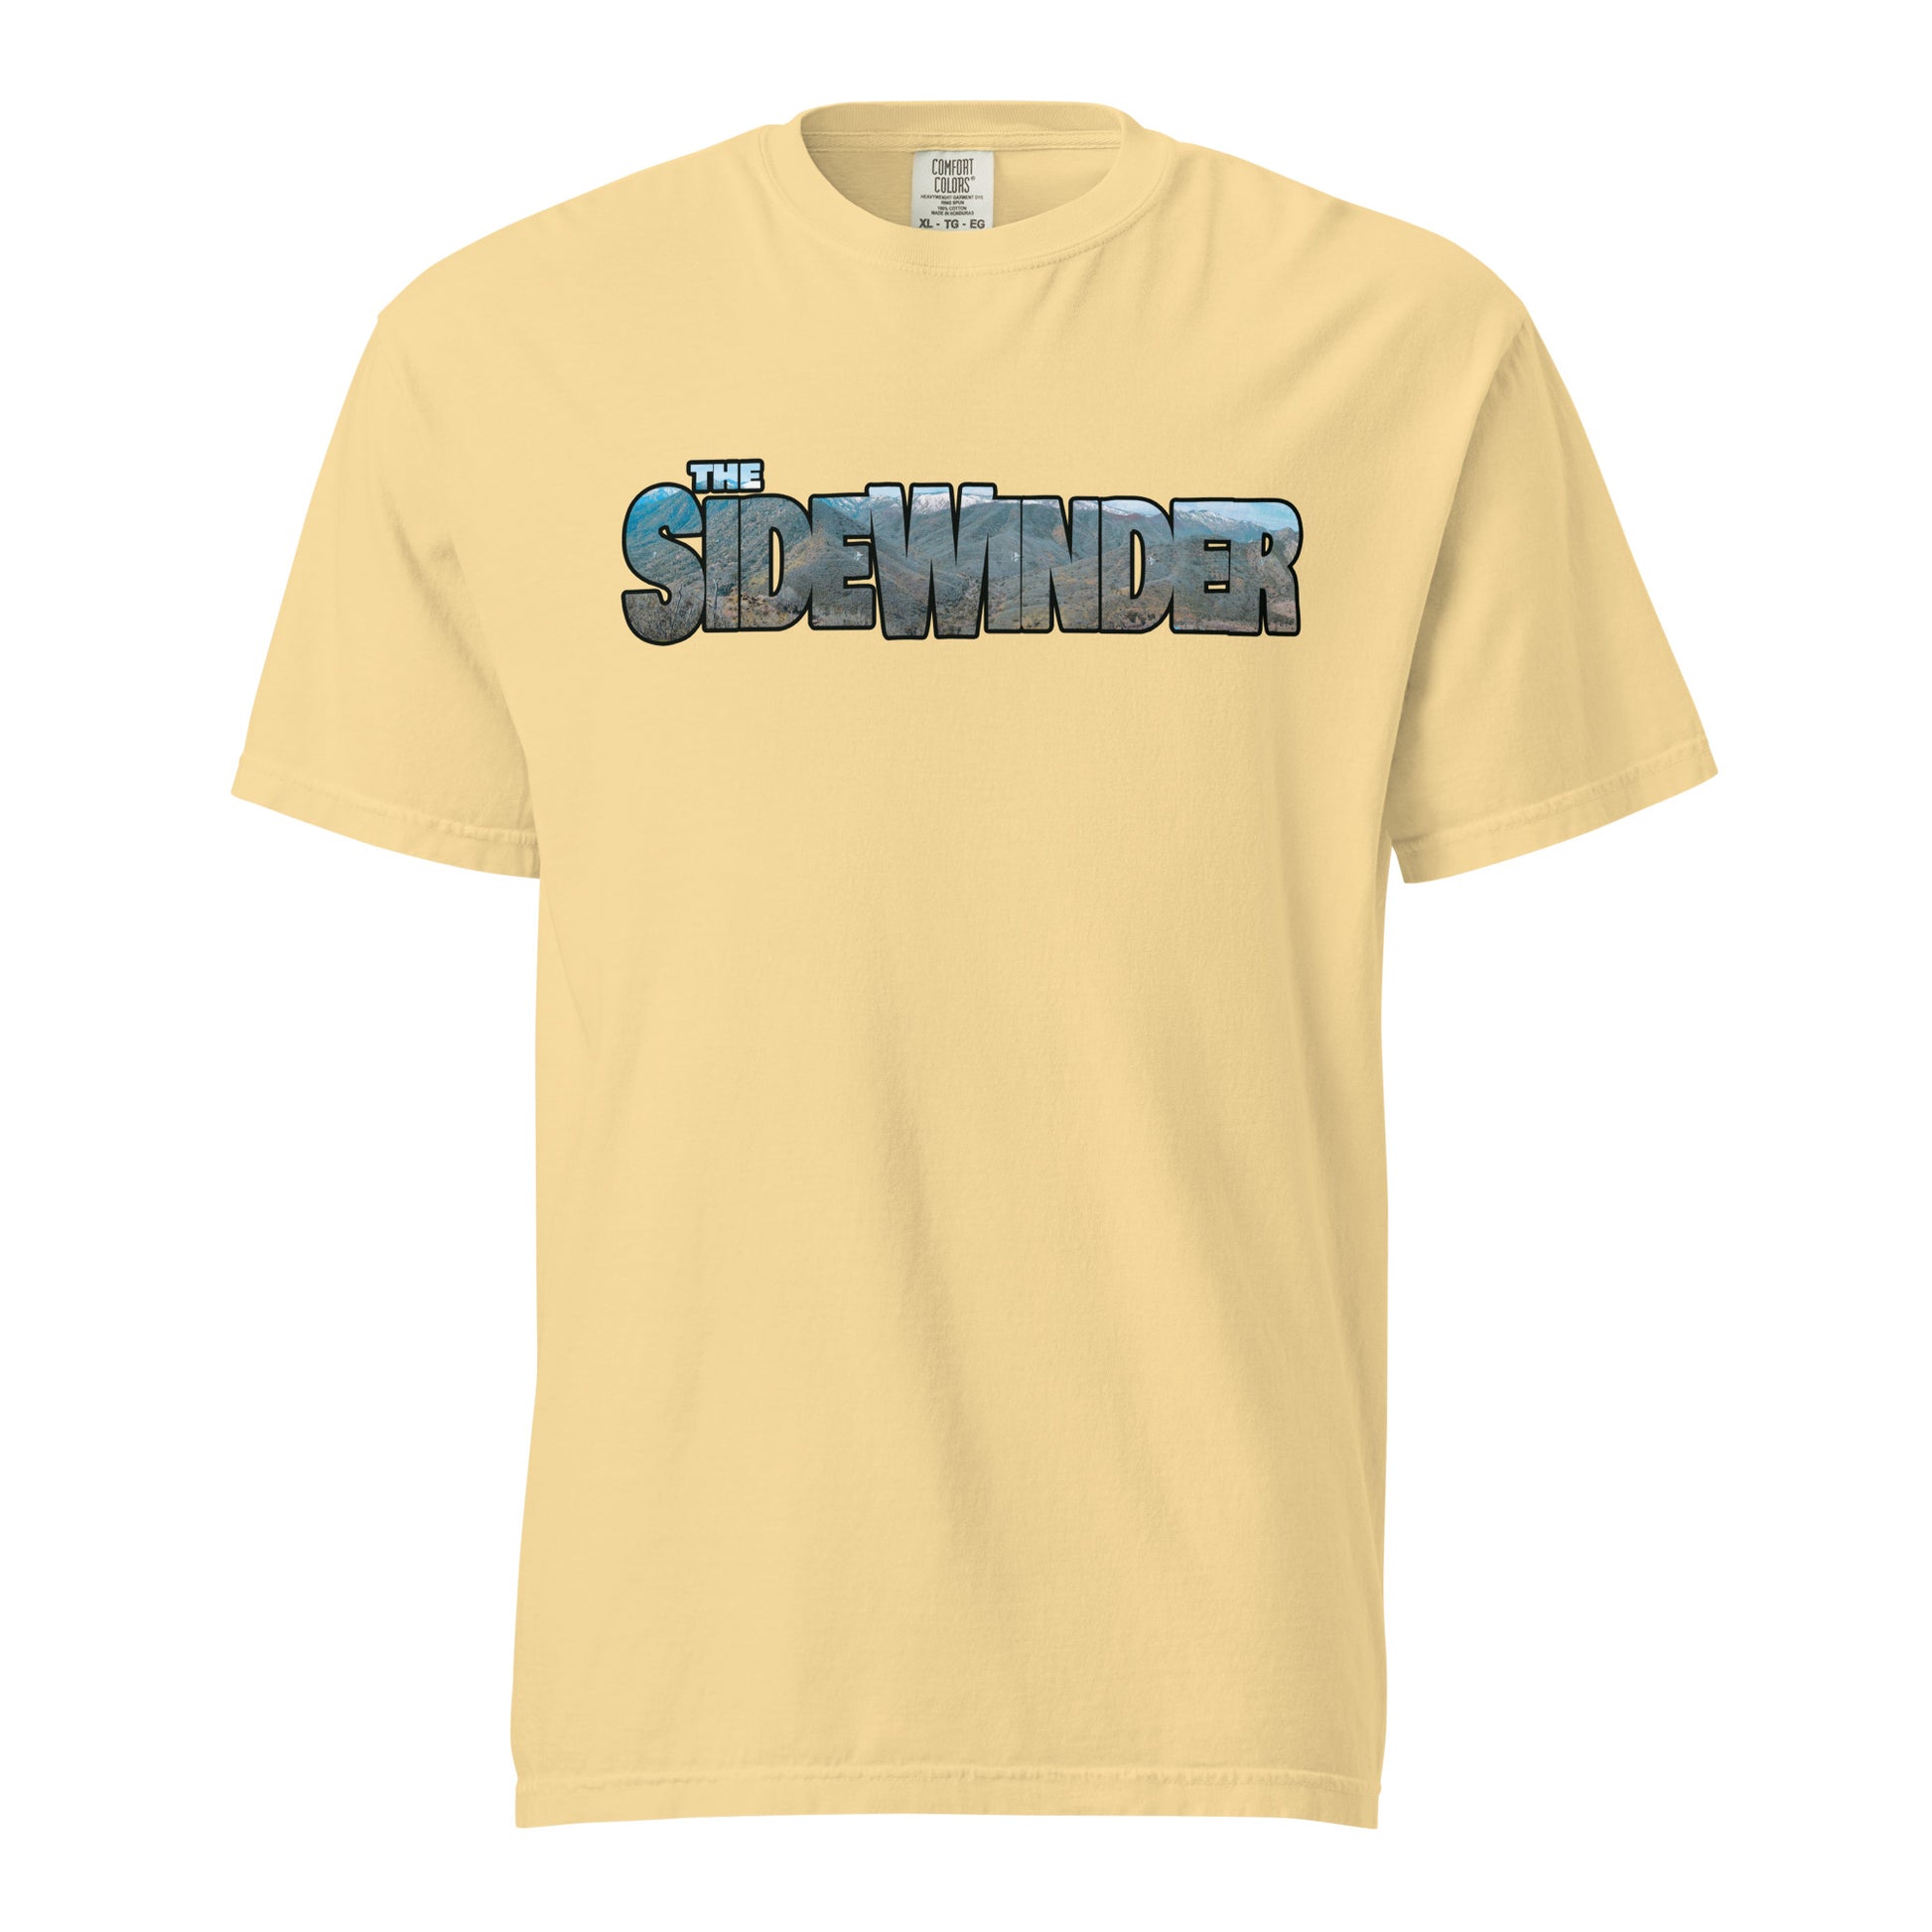 This shirt features an image of a an F-35 performing a low level pass through mountains contained inside of the words "The Sidewinder"